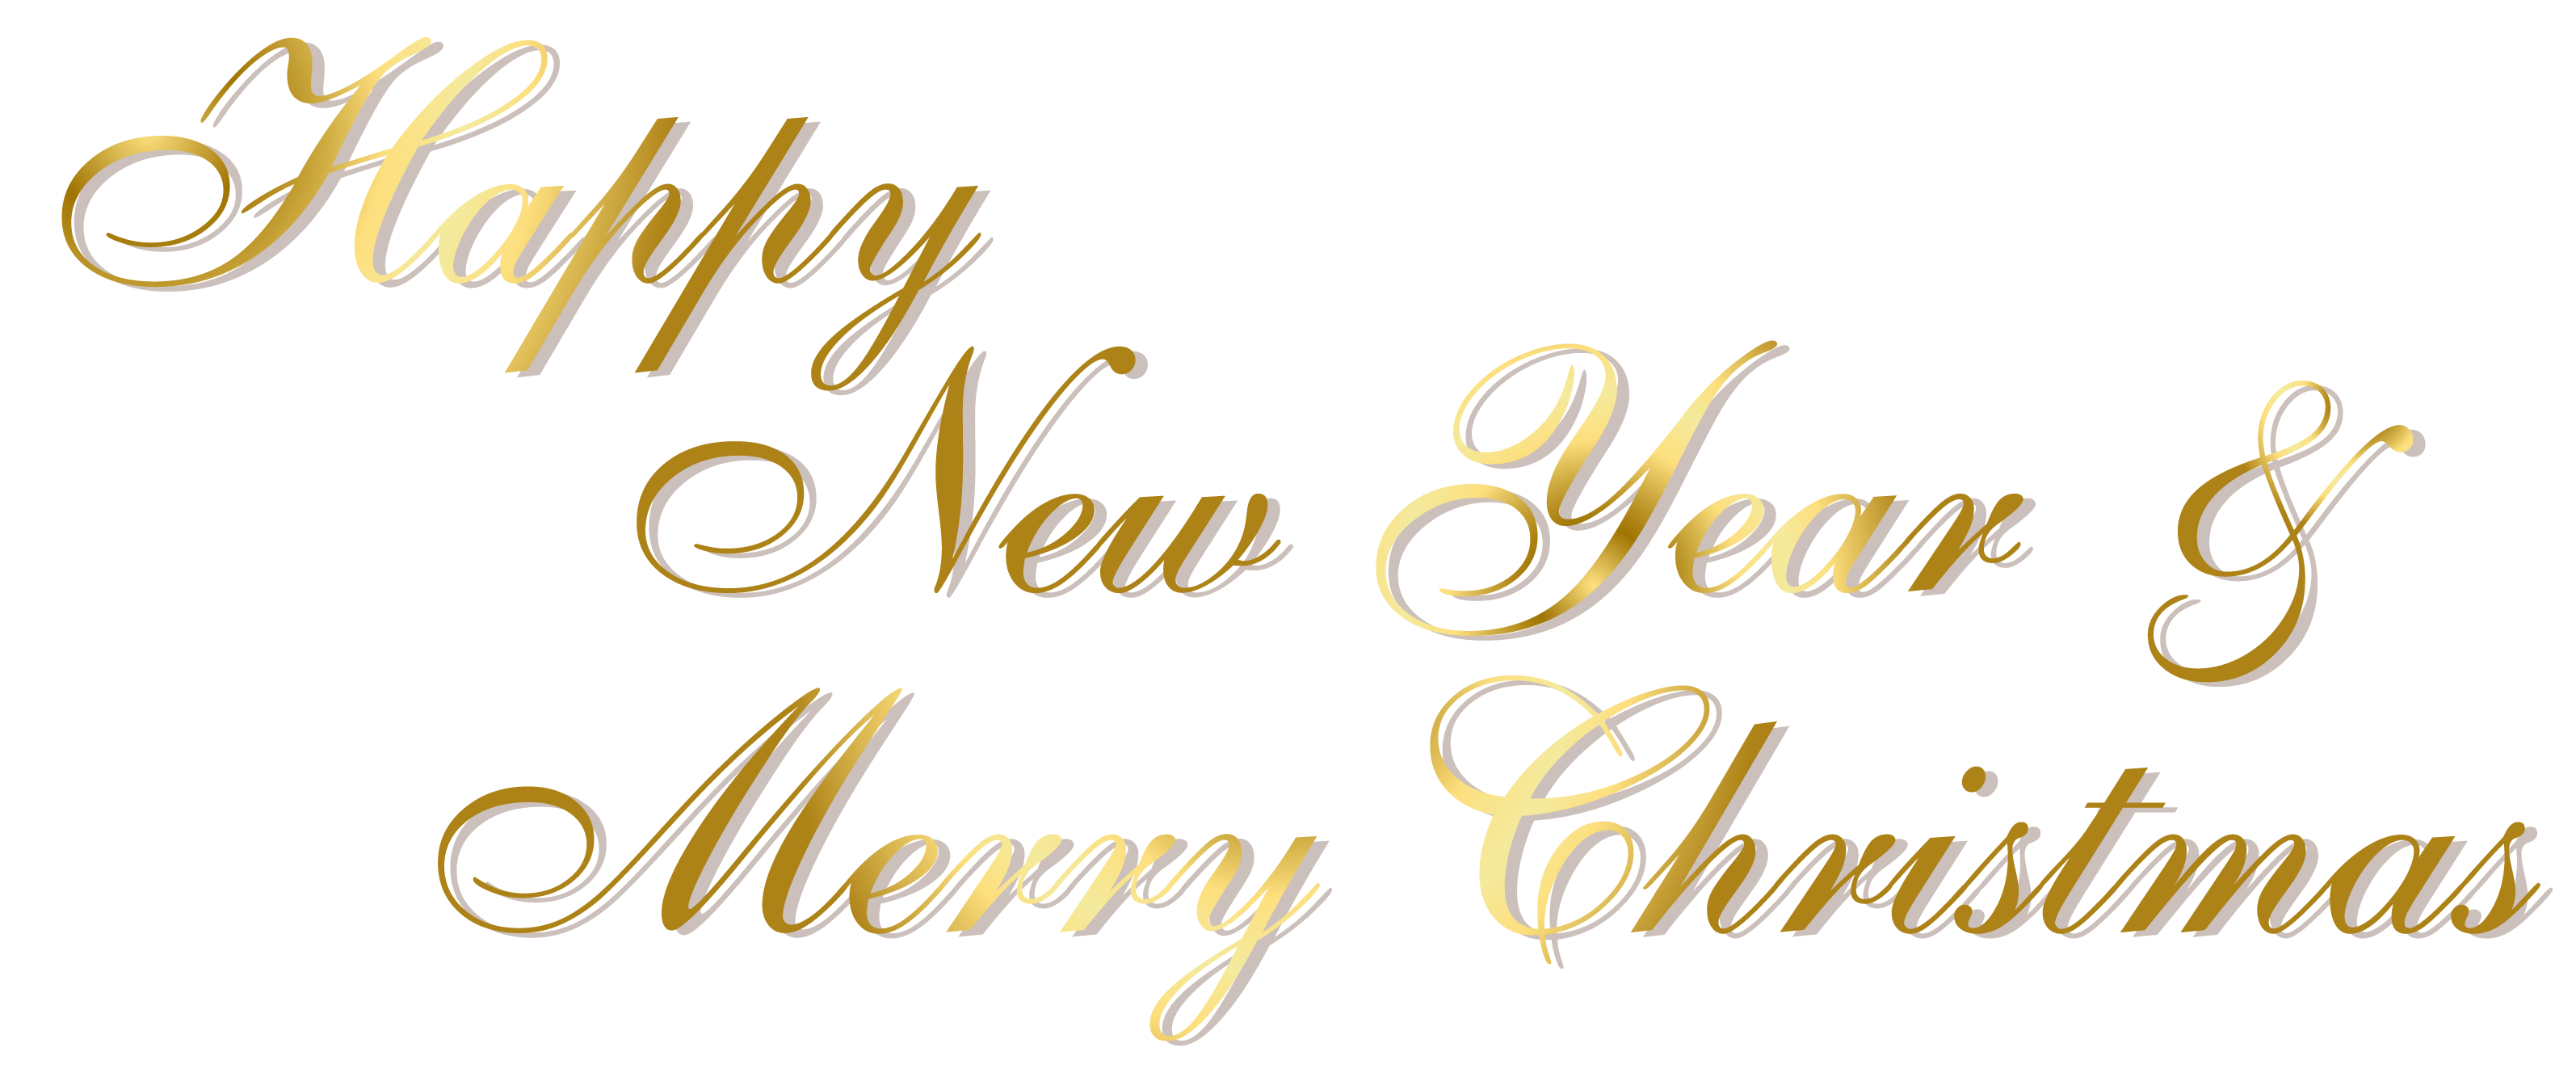 clipart border new year